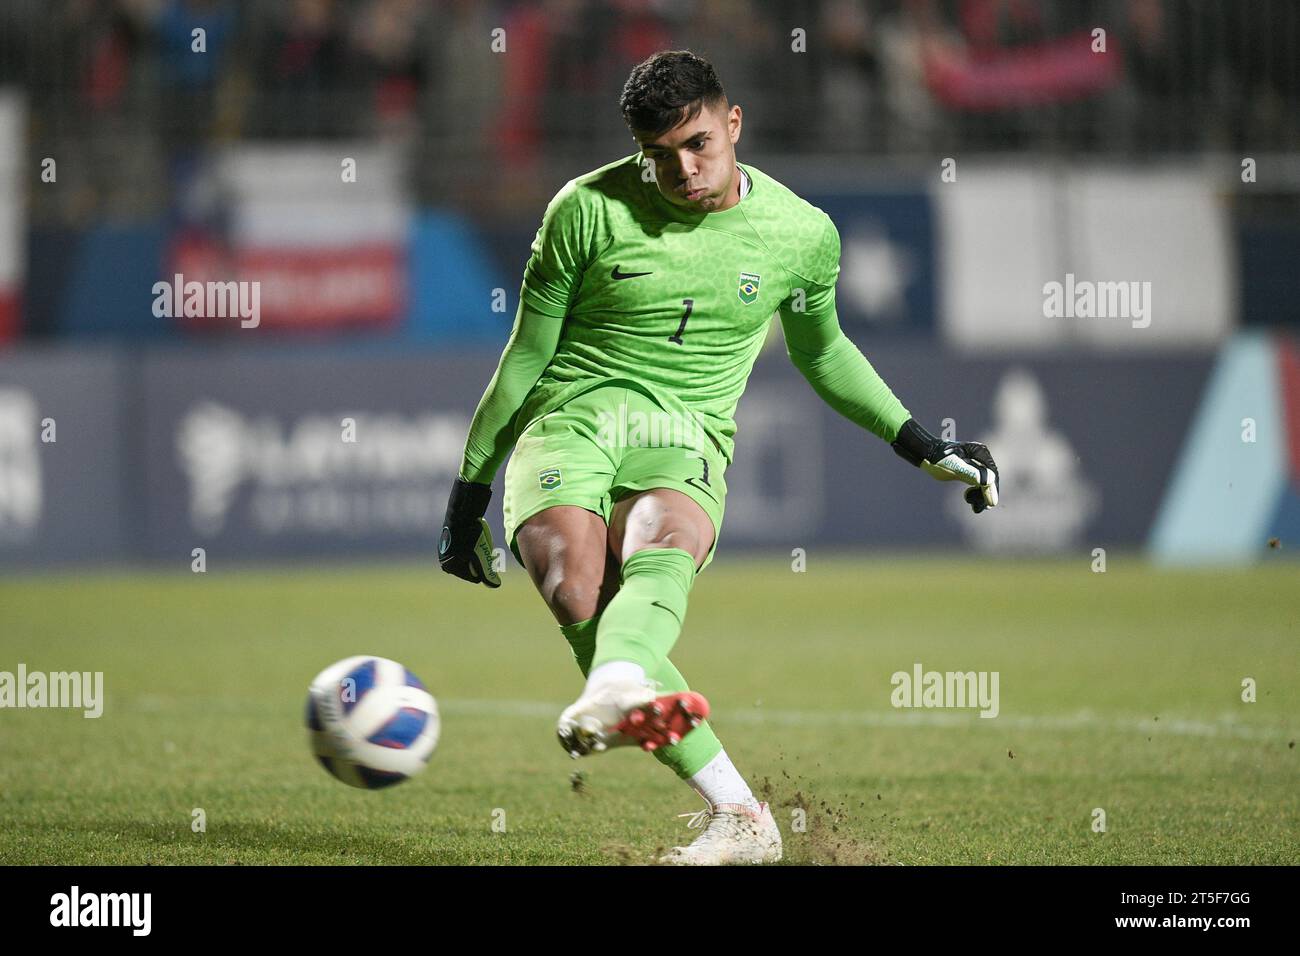 Vina Del Mar, Chile. 4th Nov, 2023. Mycael Pontes, goalkeeper of Brazil, shoots to score during the penalty shootout of the men's gold medal match of the football event between Brazil and Chile at Pan American Games 2023, in Vina Del Mar, Chile, on Nov. 4, 2023. Credit: Xin Yuewei/Xinhua/Alamy Live News Stock Photo